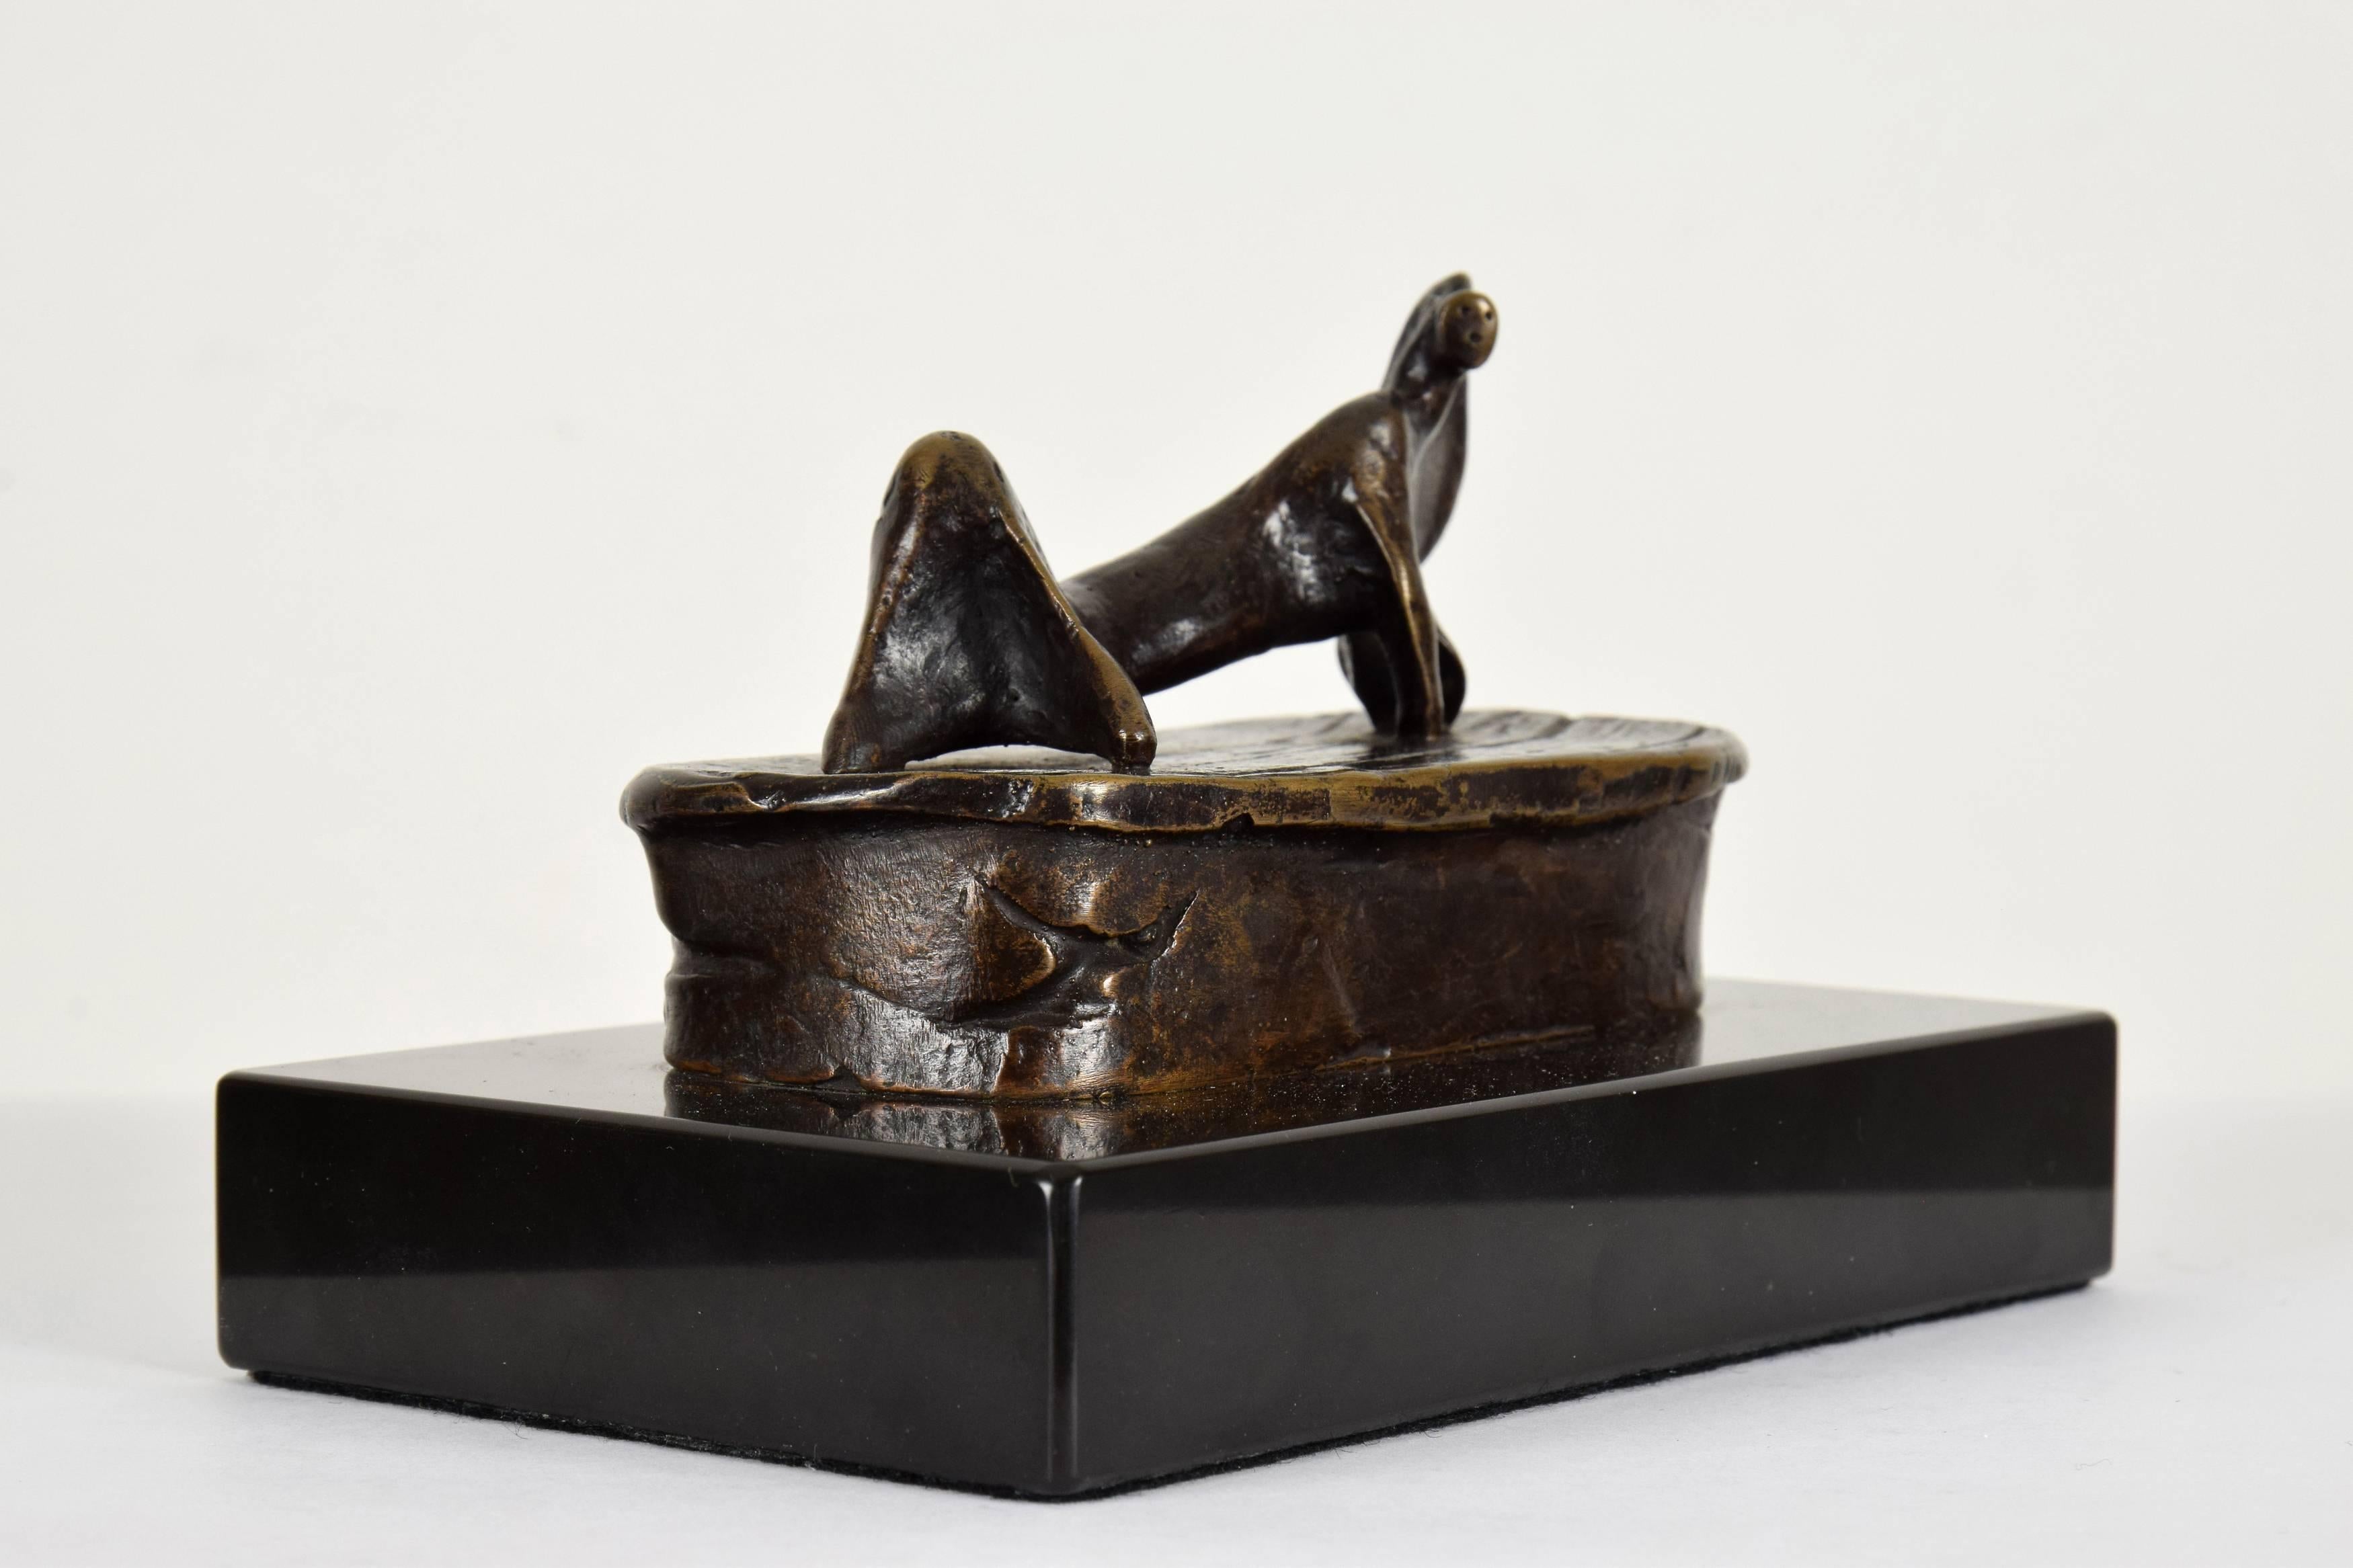 Maquette for Reclining Figure: Cloak - Sculpture by Henry Moore